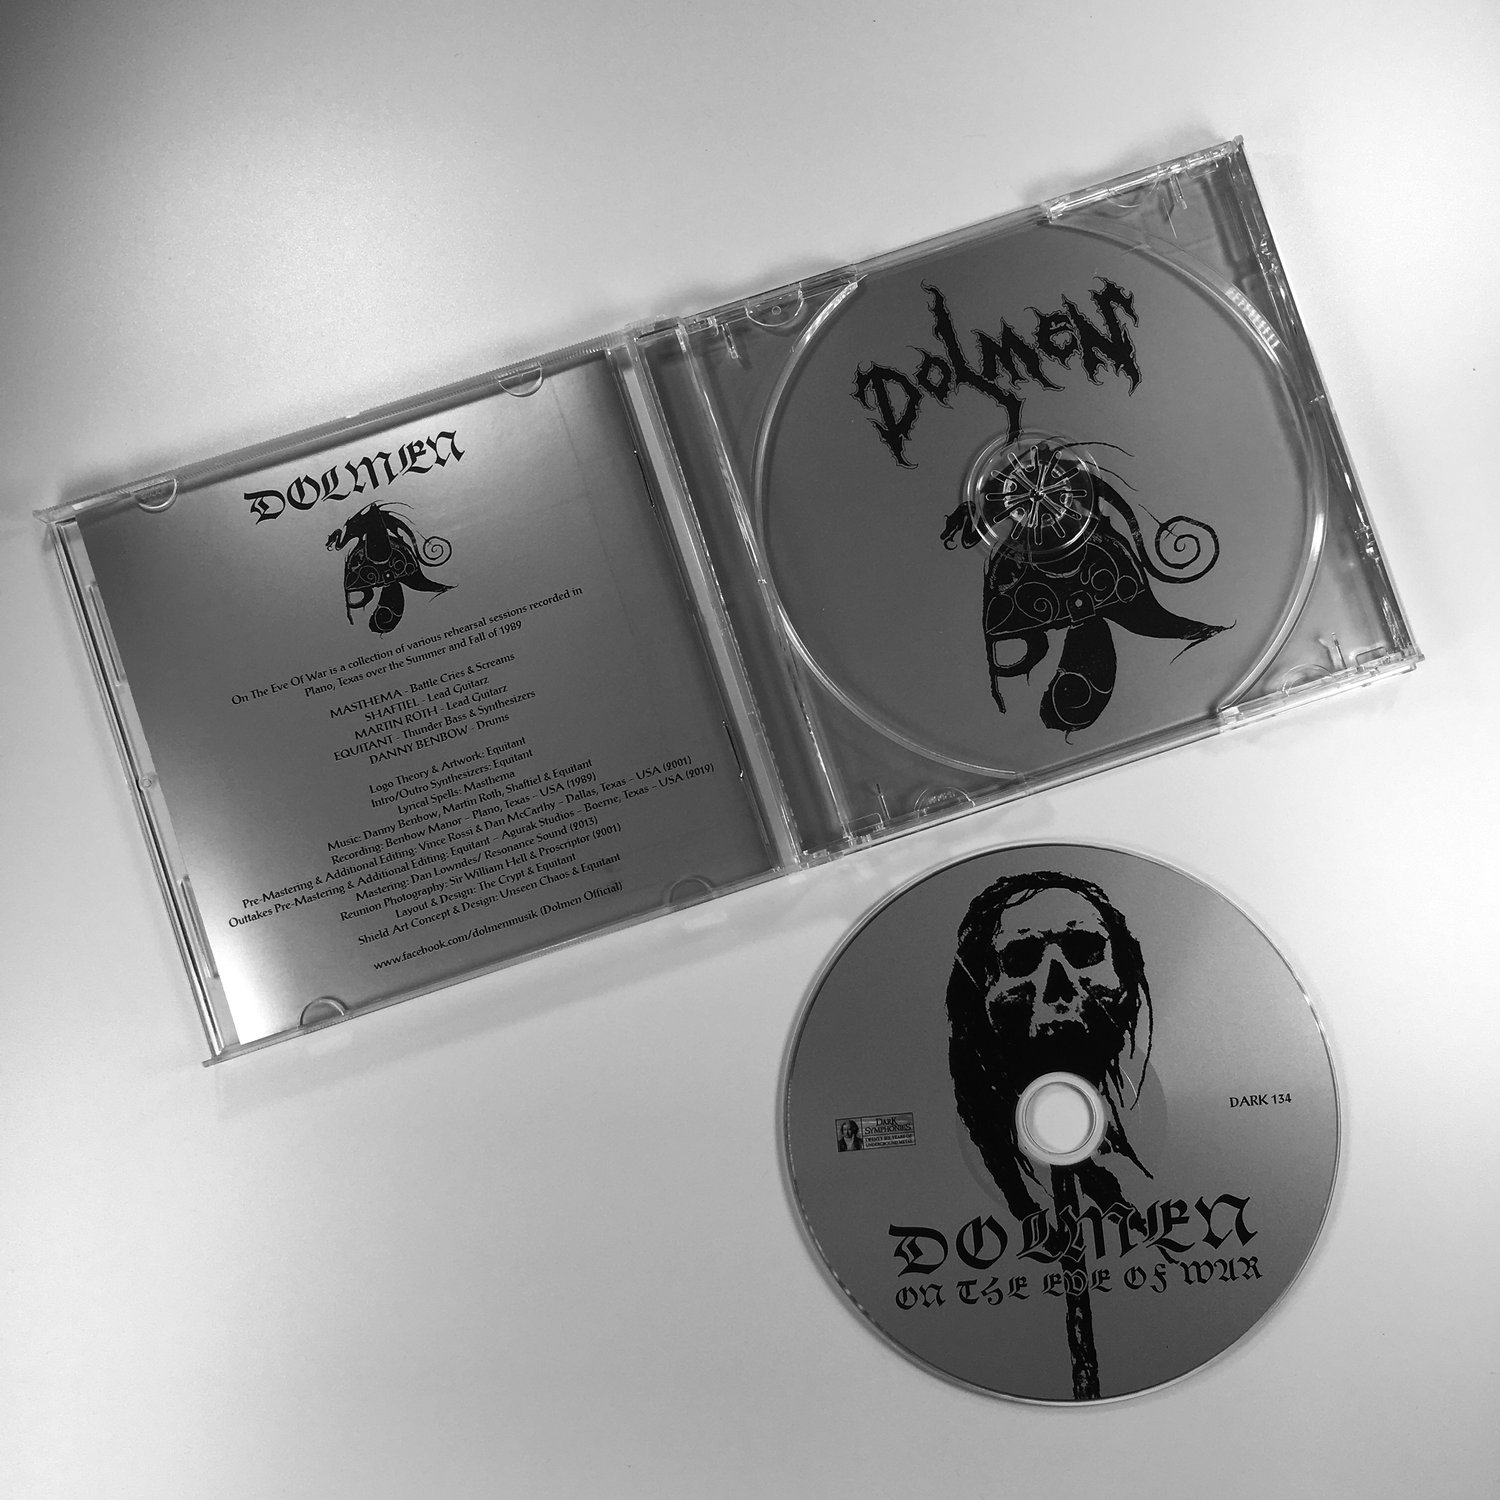 Image of DOLMEN - ON THE EVE OF WAR + UNRELEASED BONUS TRACKS - DELUXE EDITION CD 